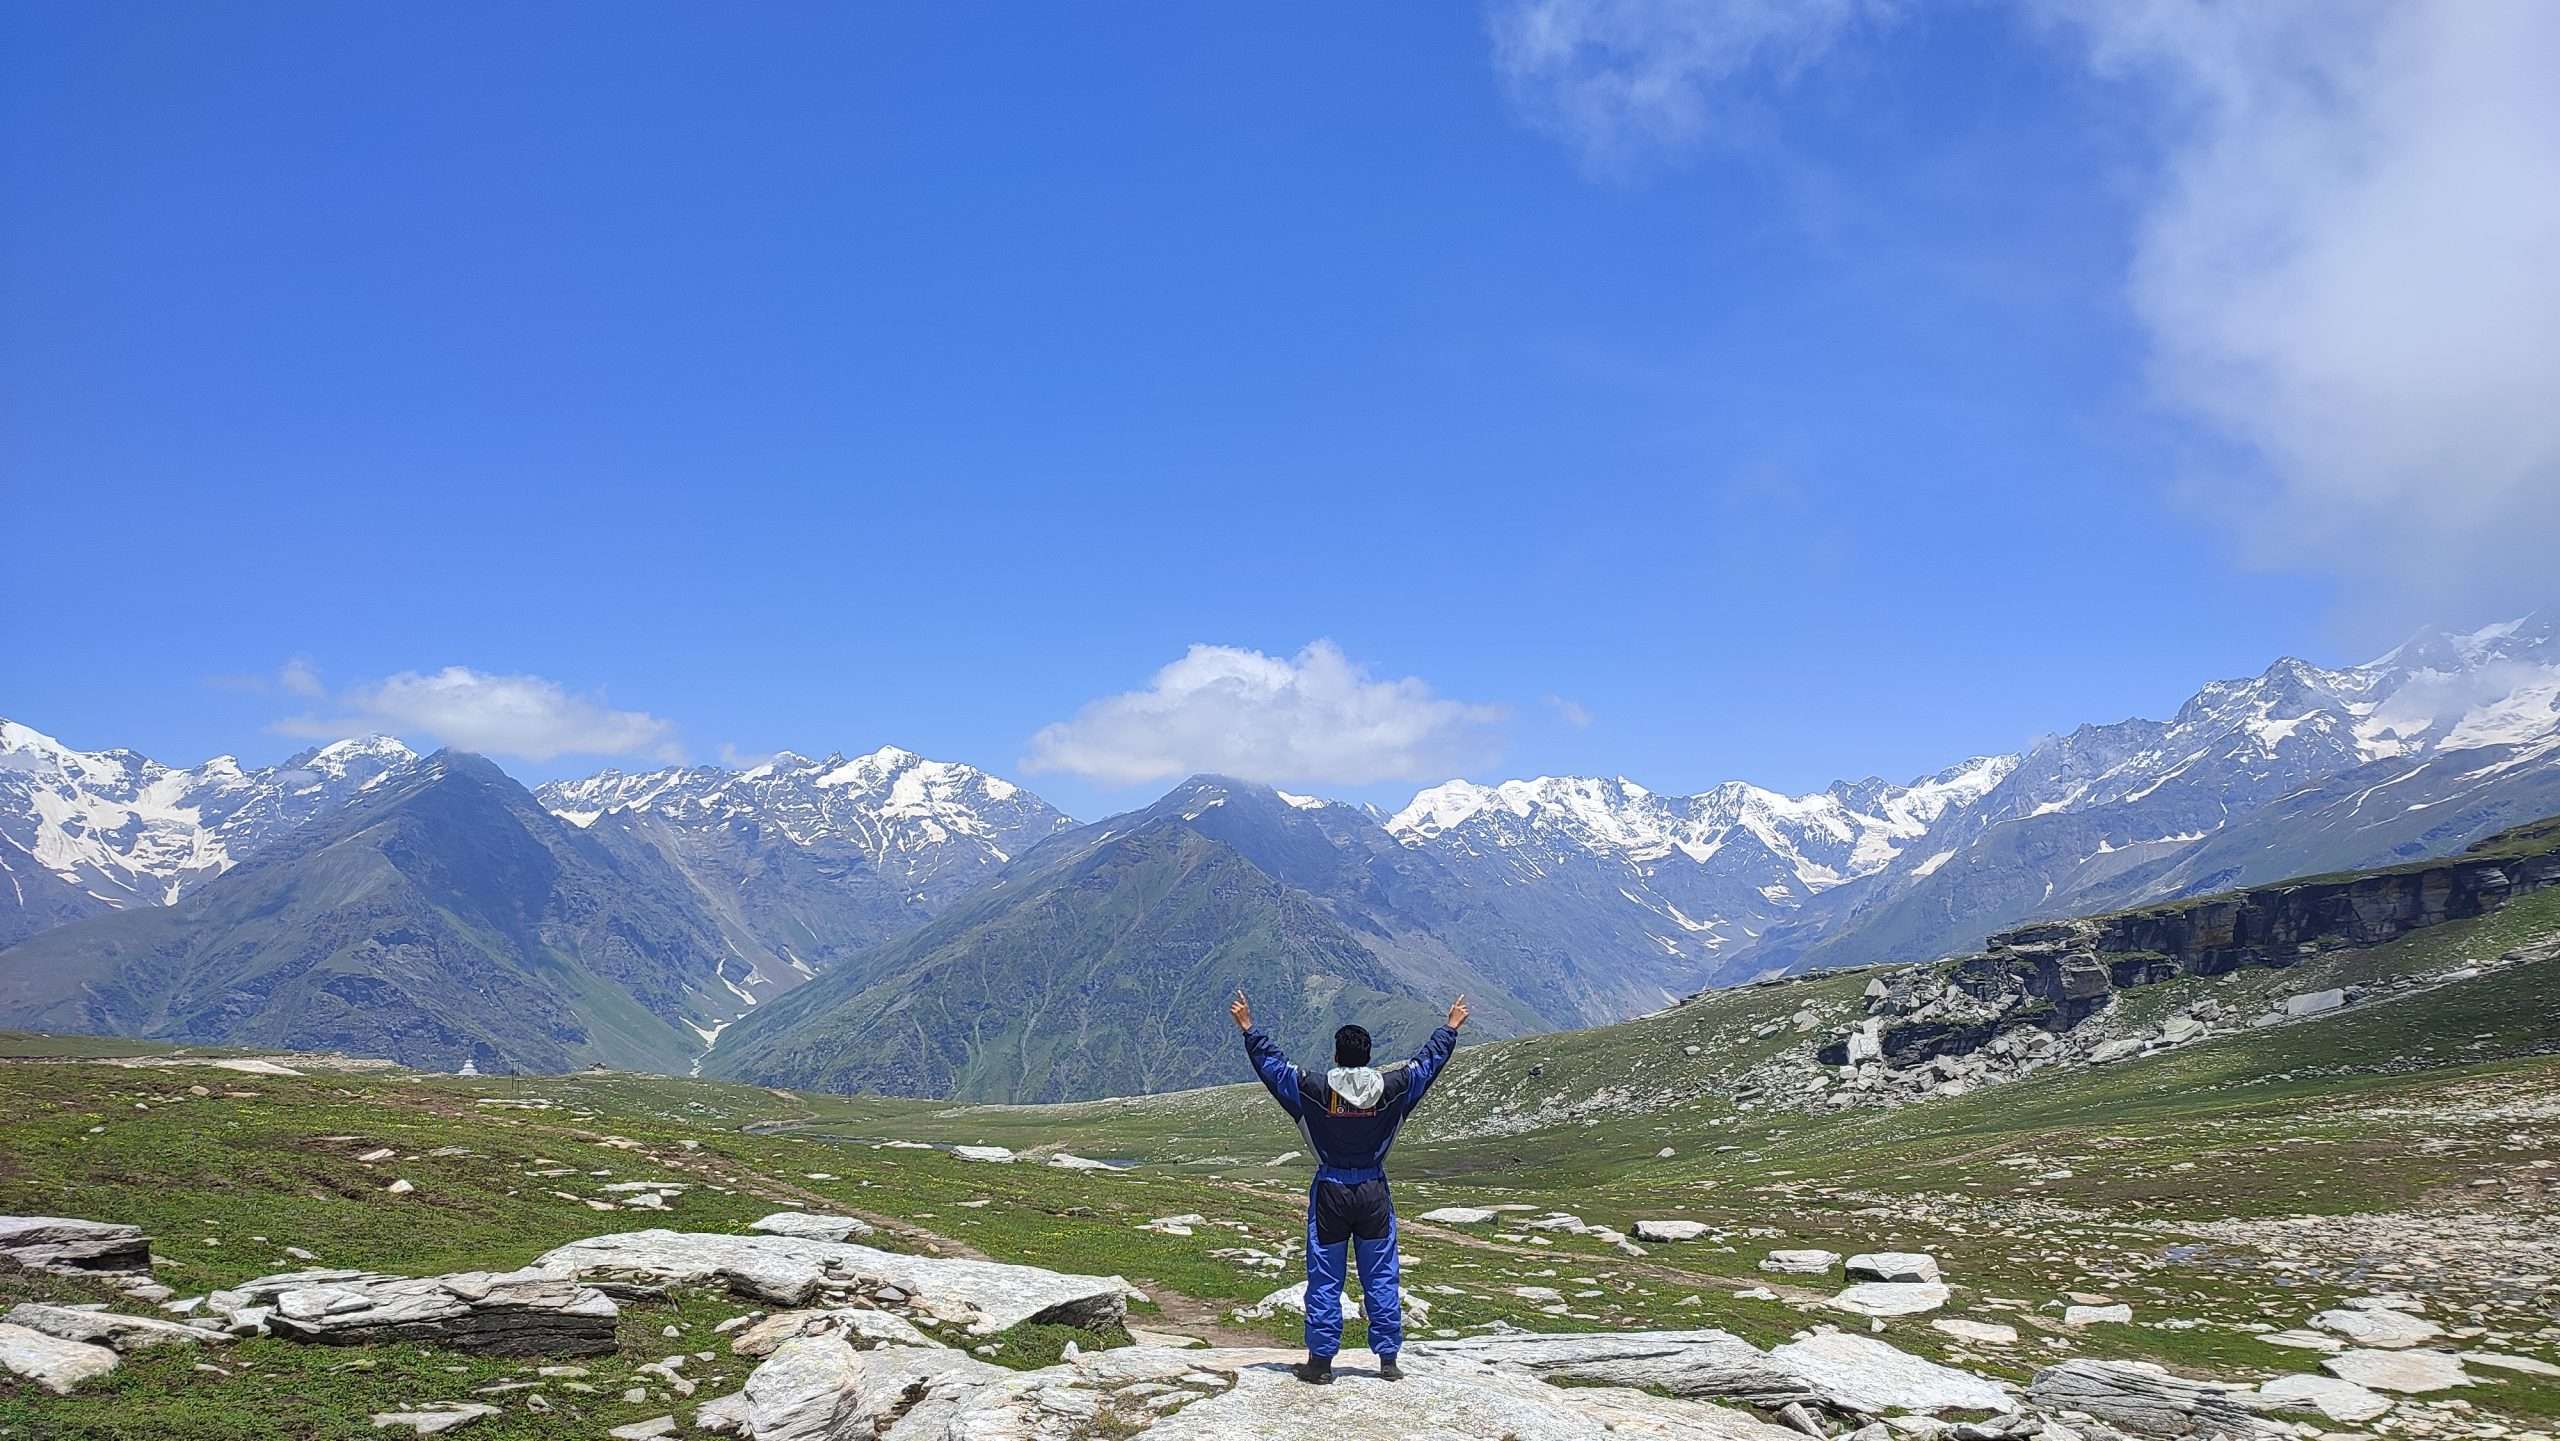 How to reach Manali